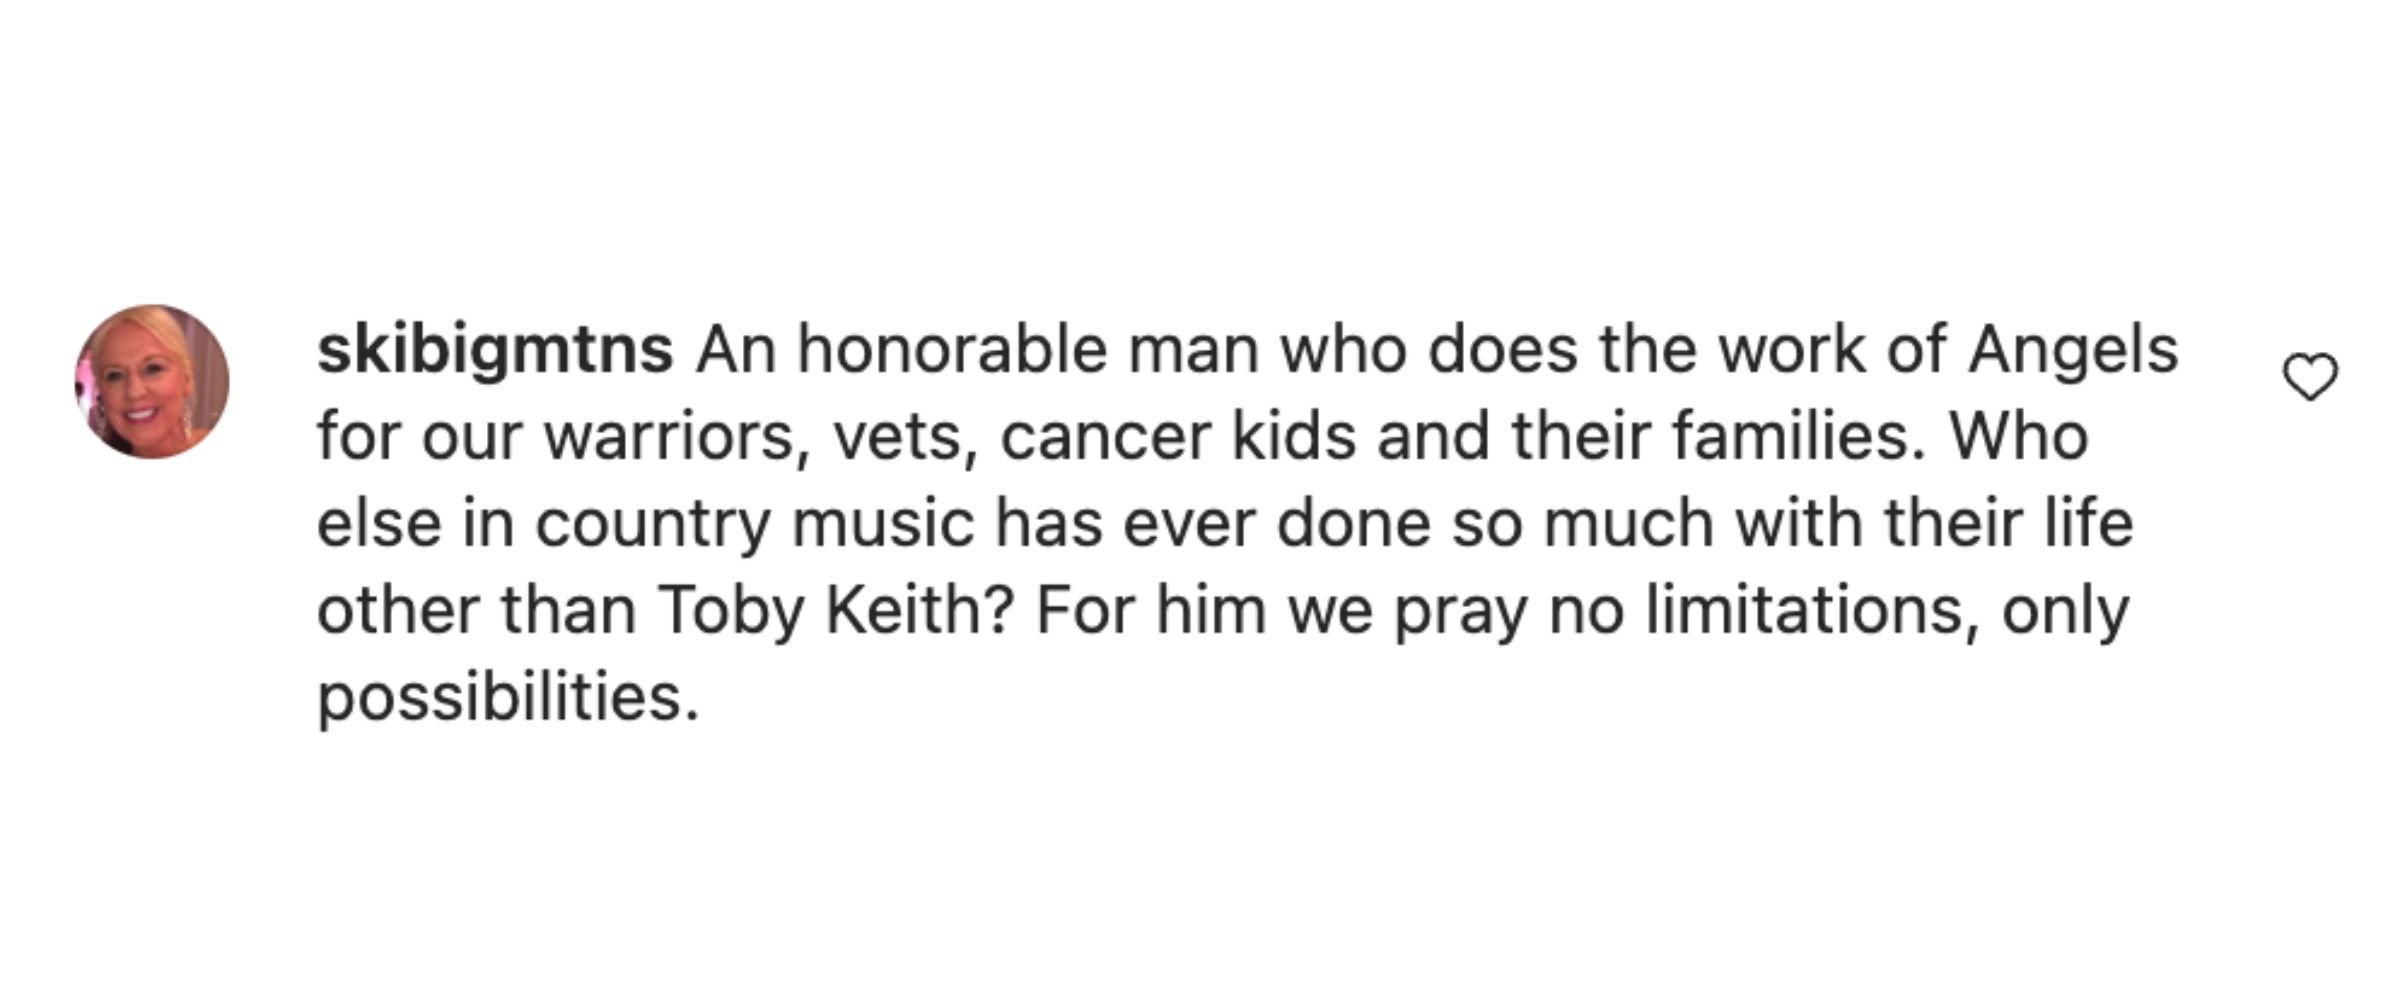 A fan's comment on Toby Keith's June 14, 2022, Instagram post. | Source: Instagram/tobykeith